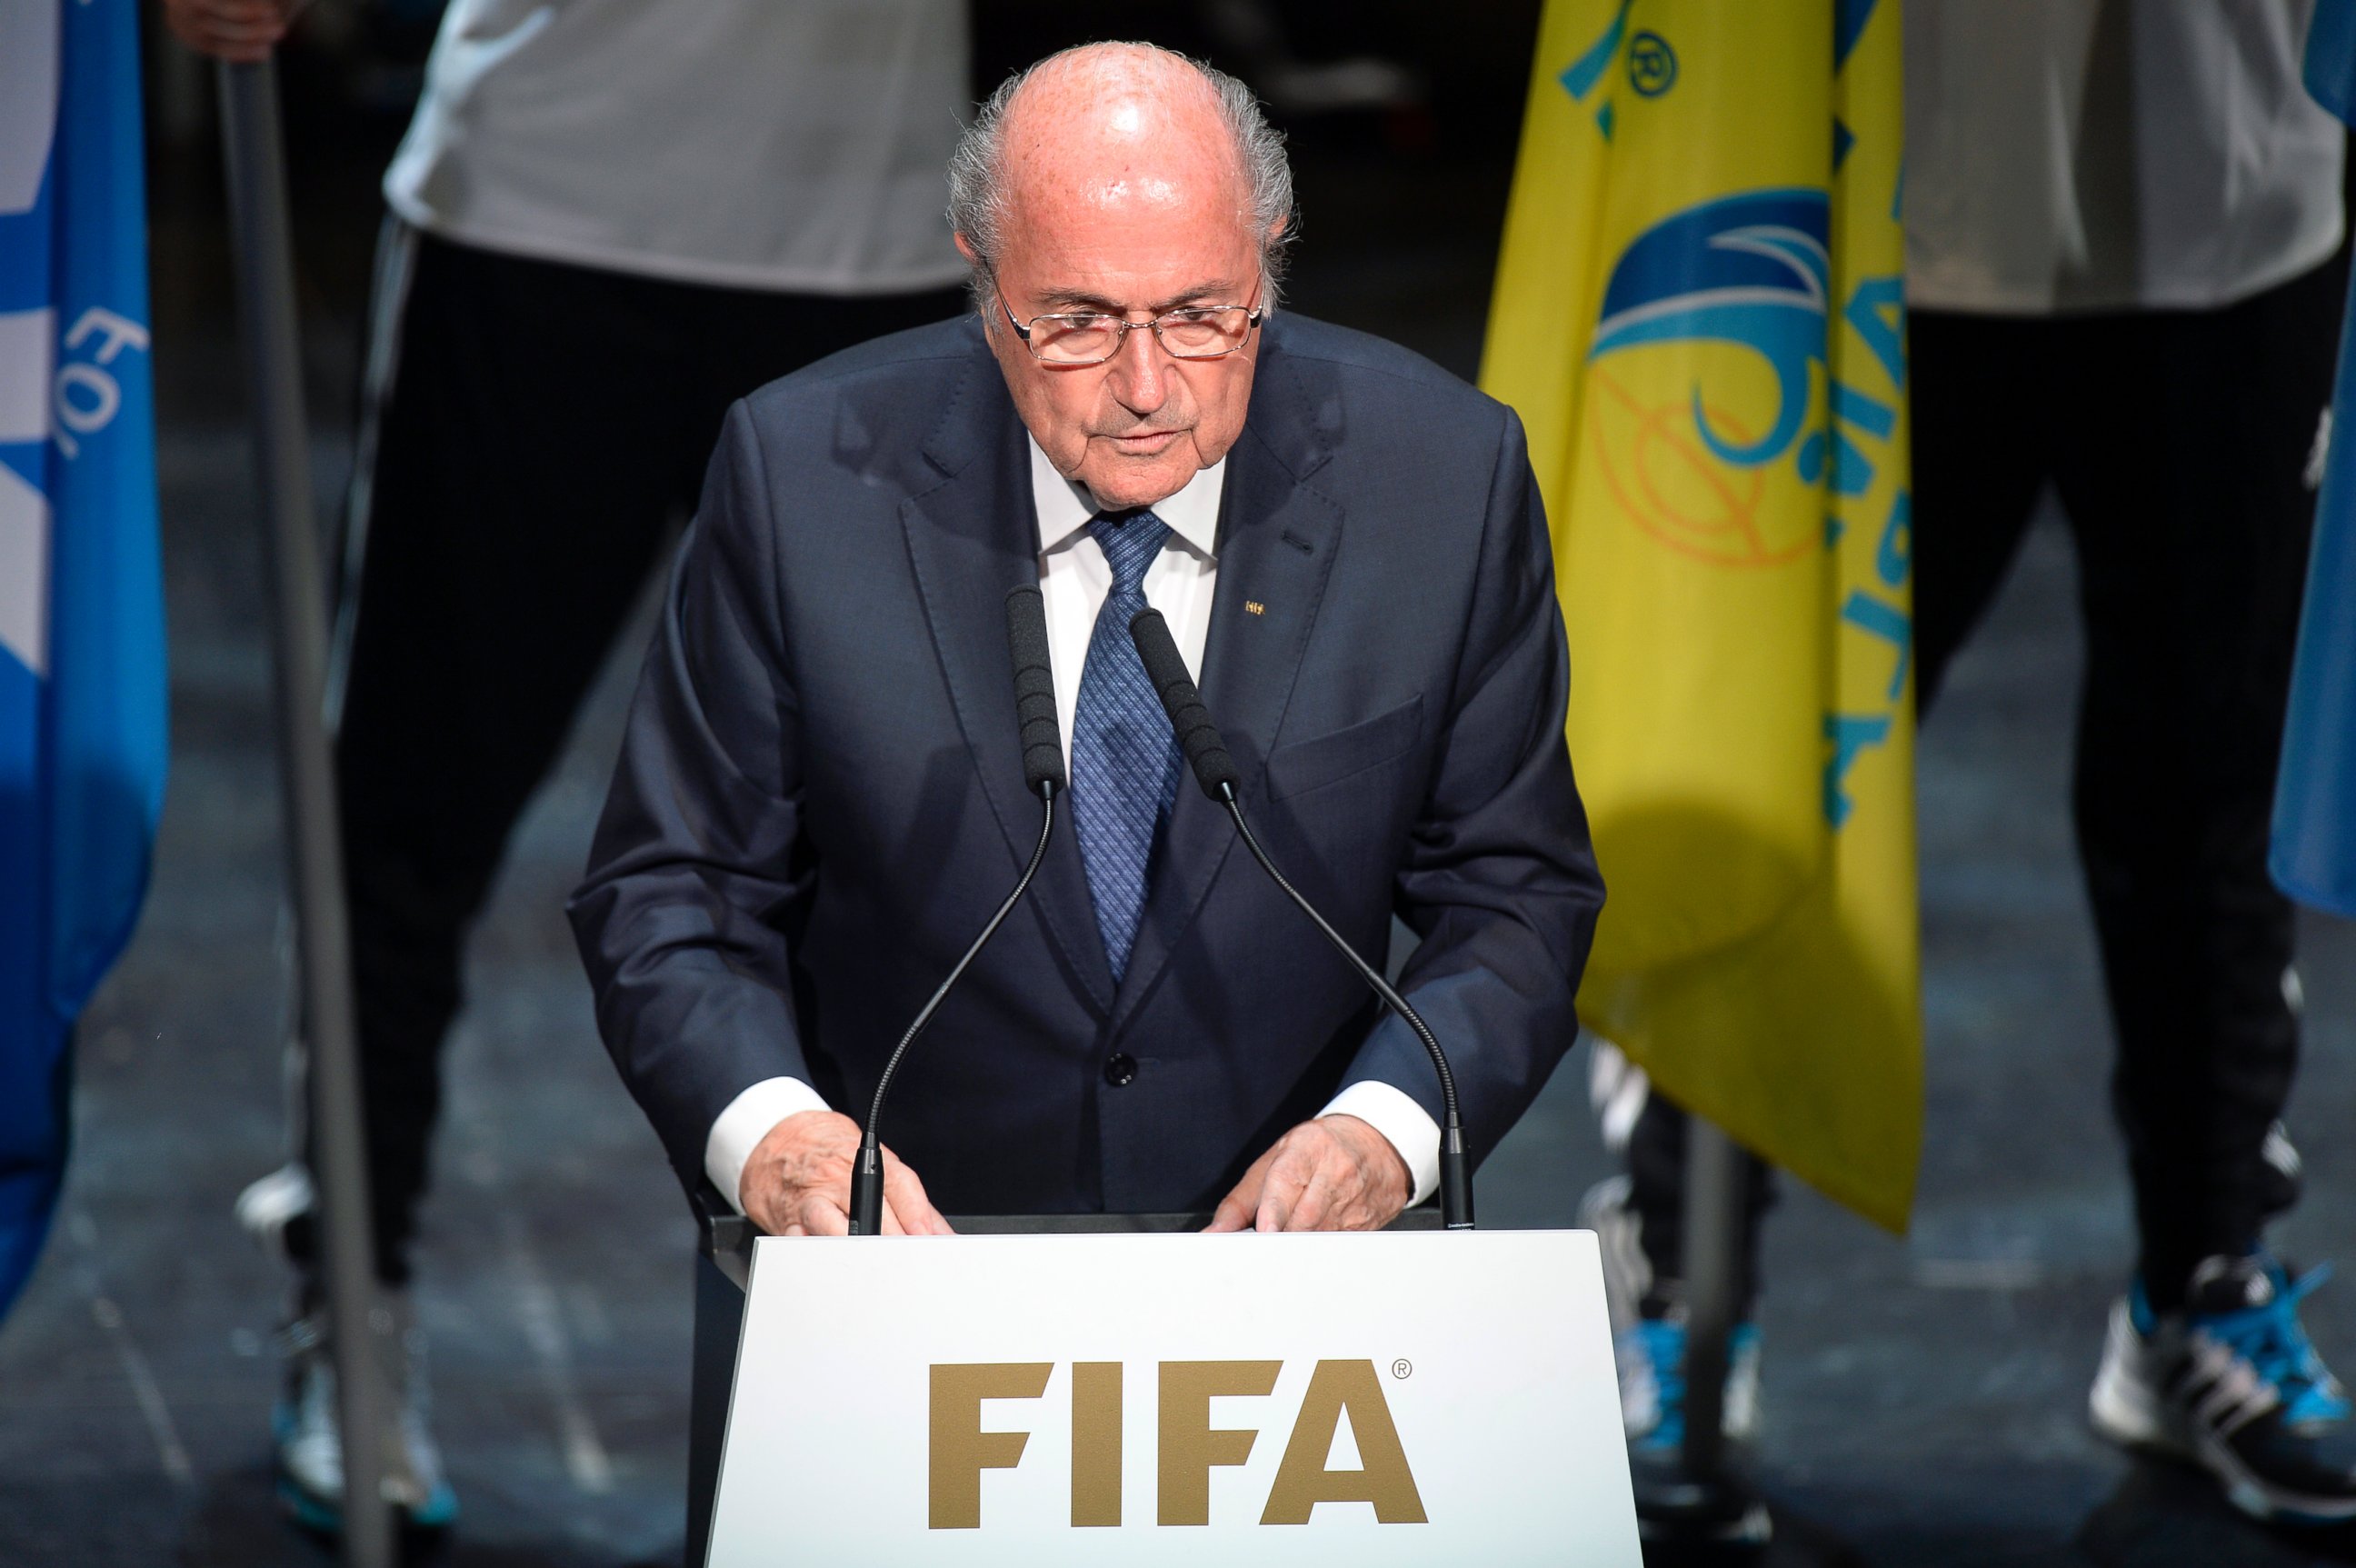 PHOTO: FIFA President Sepp Blatter speaks at the opening ceremony of the FIFA congress in Zuerich, Switzerland, May 28, 2015.